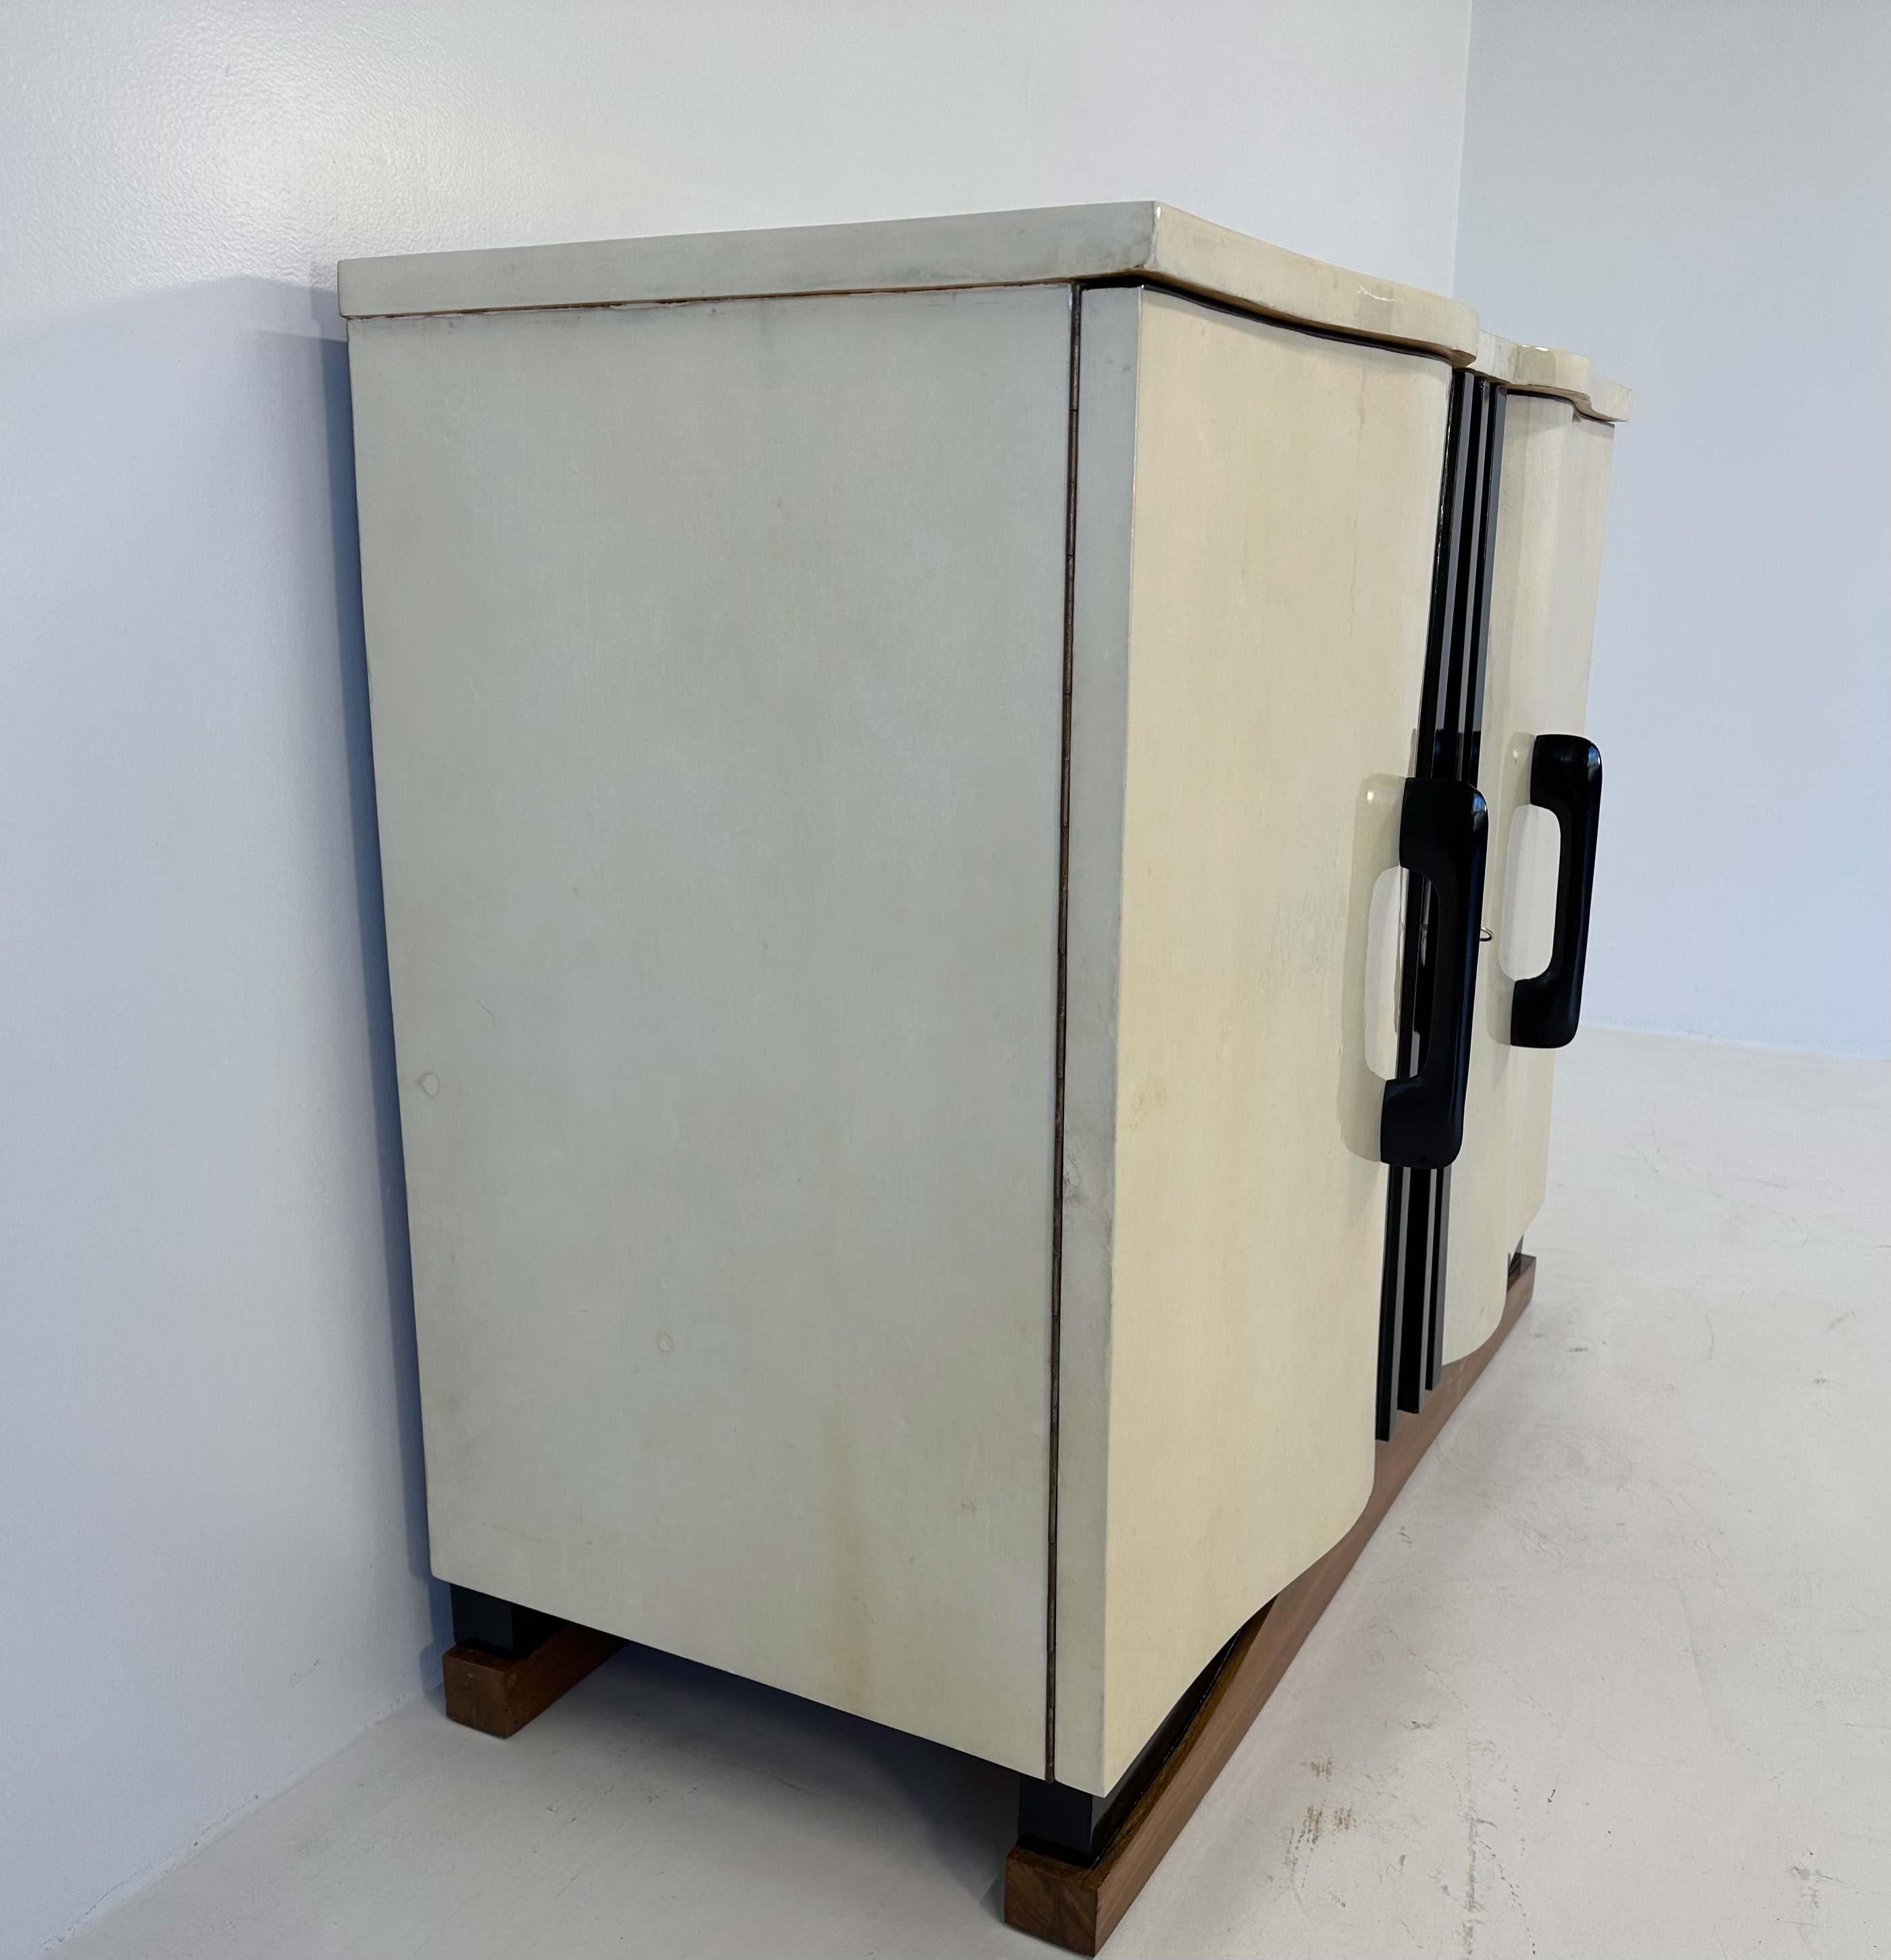 Italian Art Deco Parchment, Walnut and Black Cabinet, Attr. to Ulrich, 1936 For Sale 2